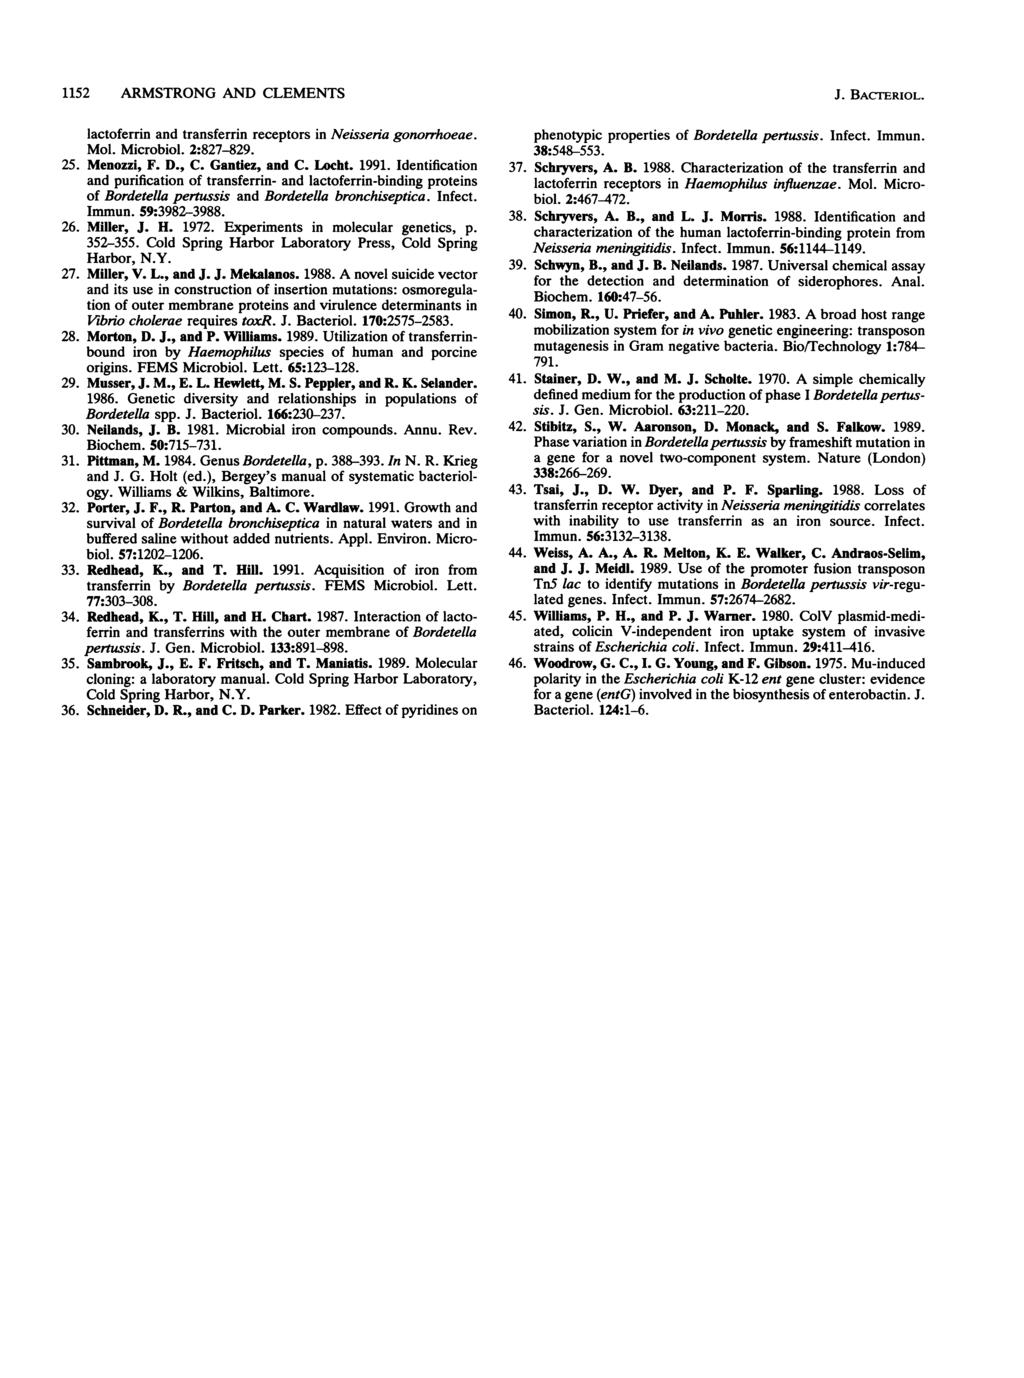 1152 ARMSTRONG AND CLEMENTS lactoferrin and transferrin receptors in Neisseria gonorrhoeae. Mol. Microbiol. 2:827-829. 25. Menozzi, F. D., C. Gantiez, and C. Locht. 1991.